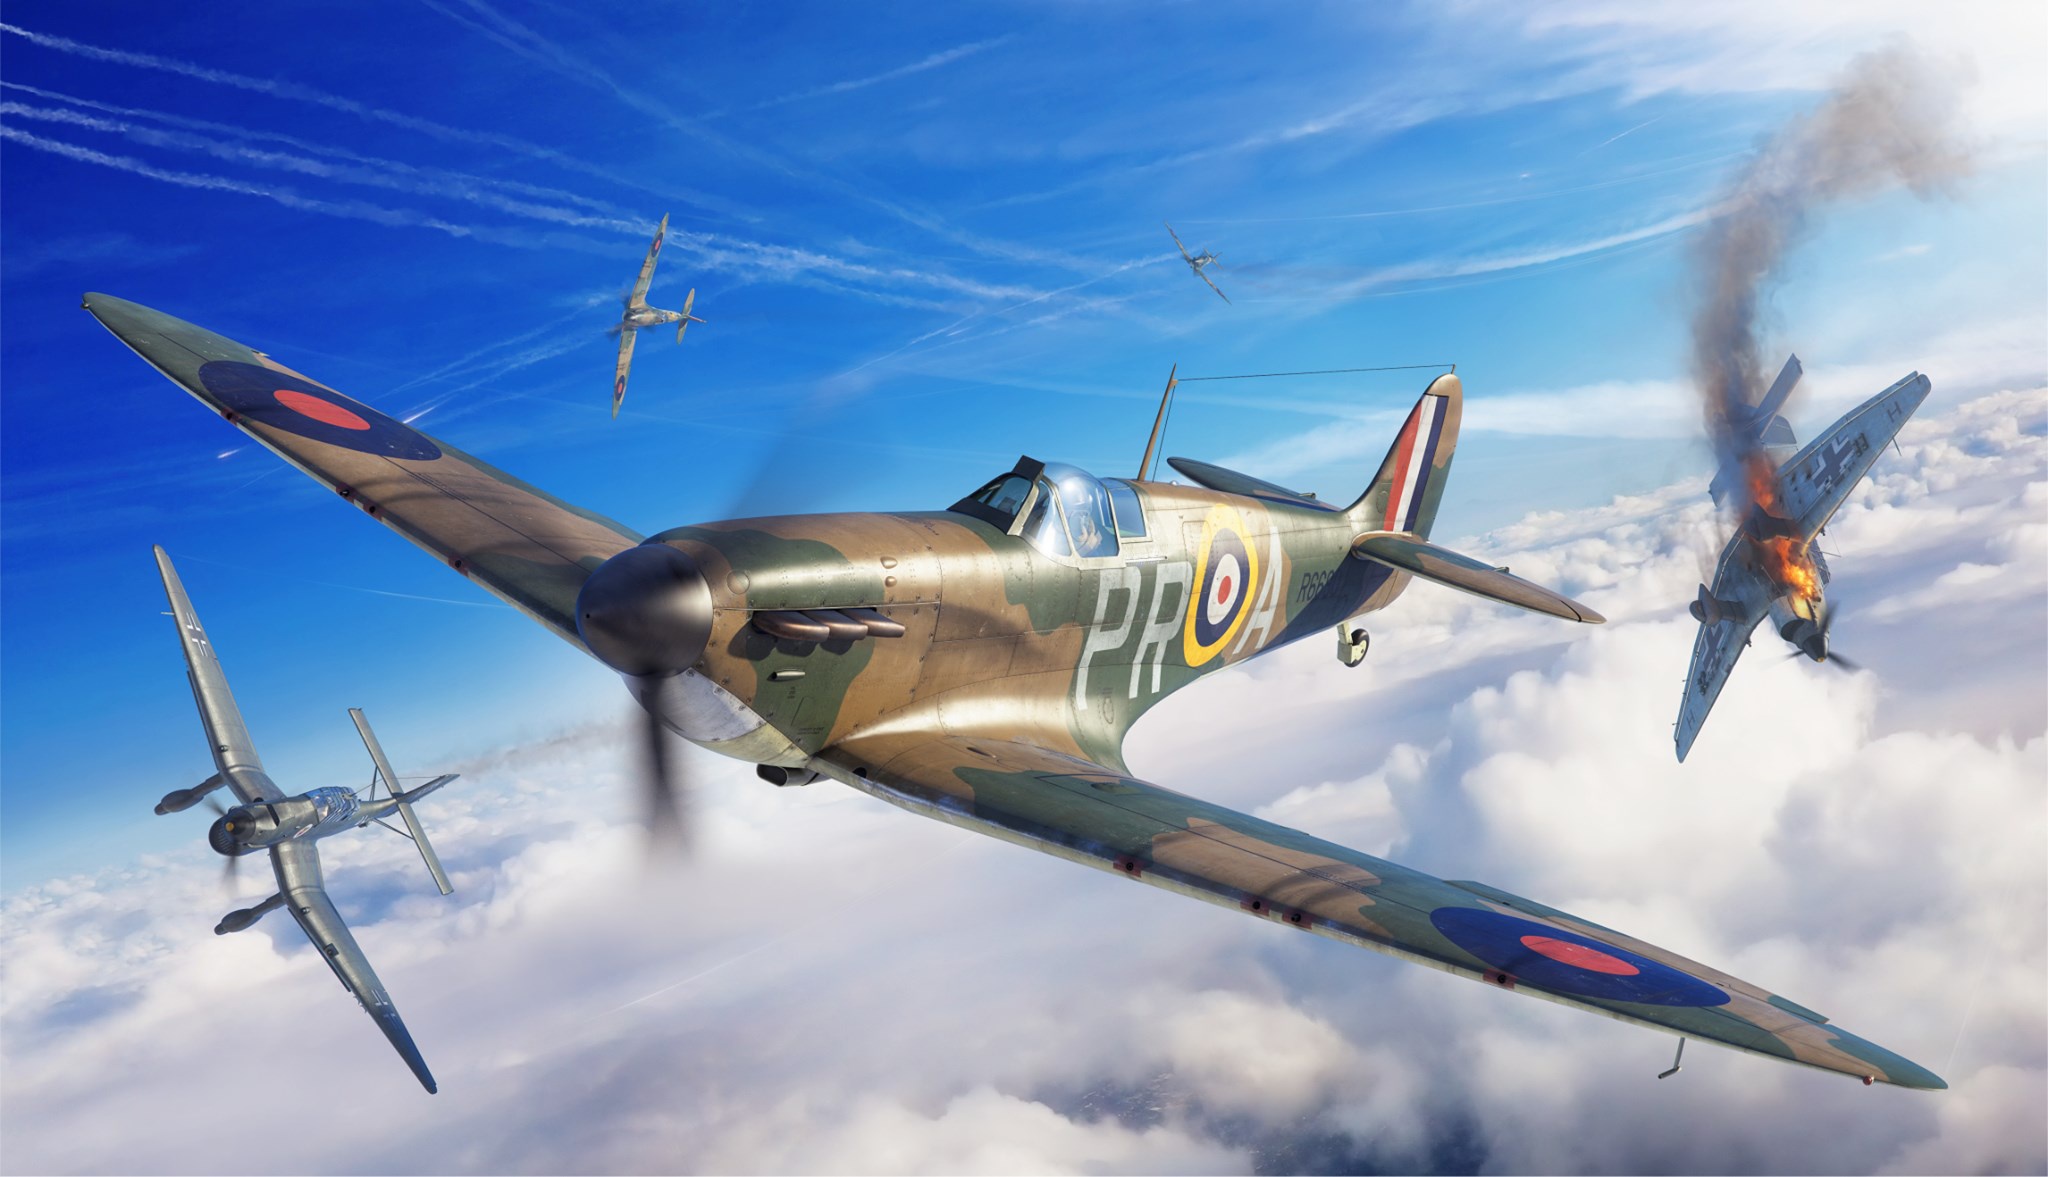 Download Supermarine Spitfire wallpapers for mobile phone free  Supermarine Spitfire HD pictures